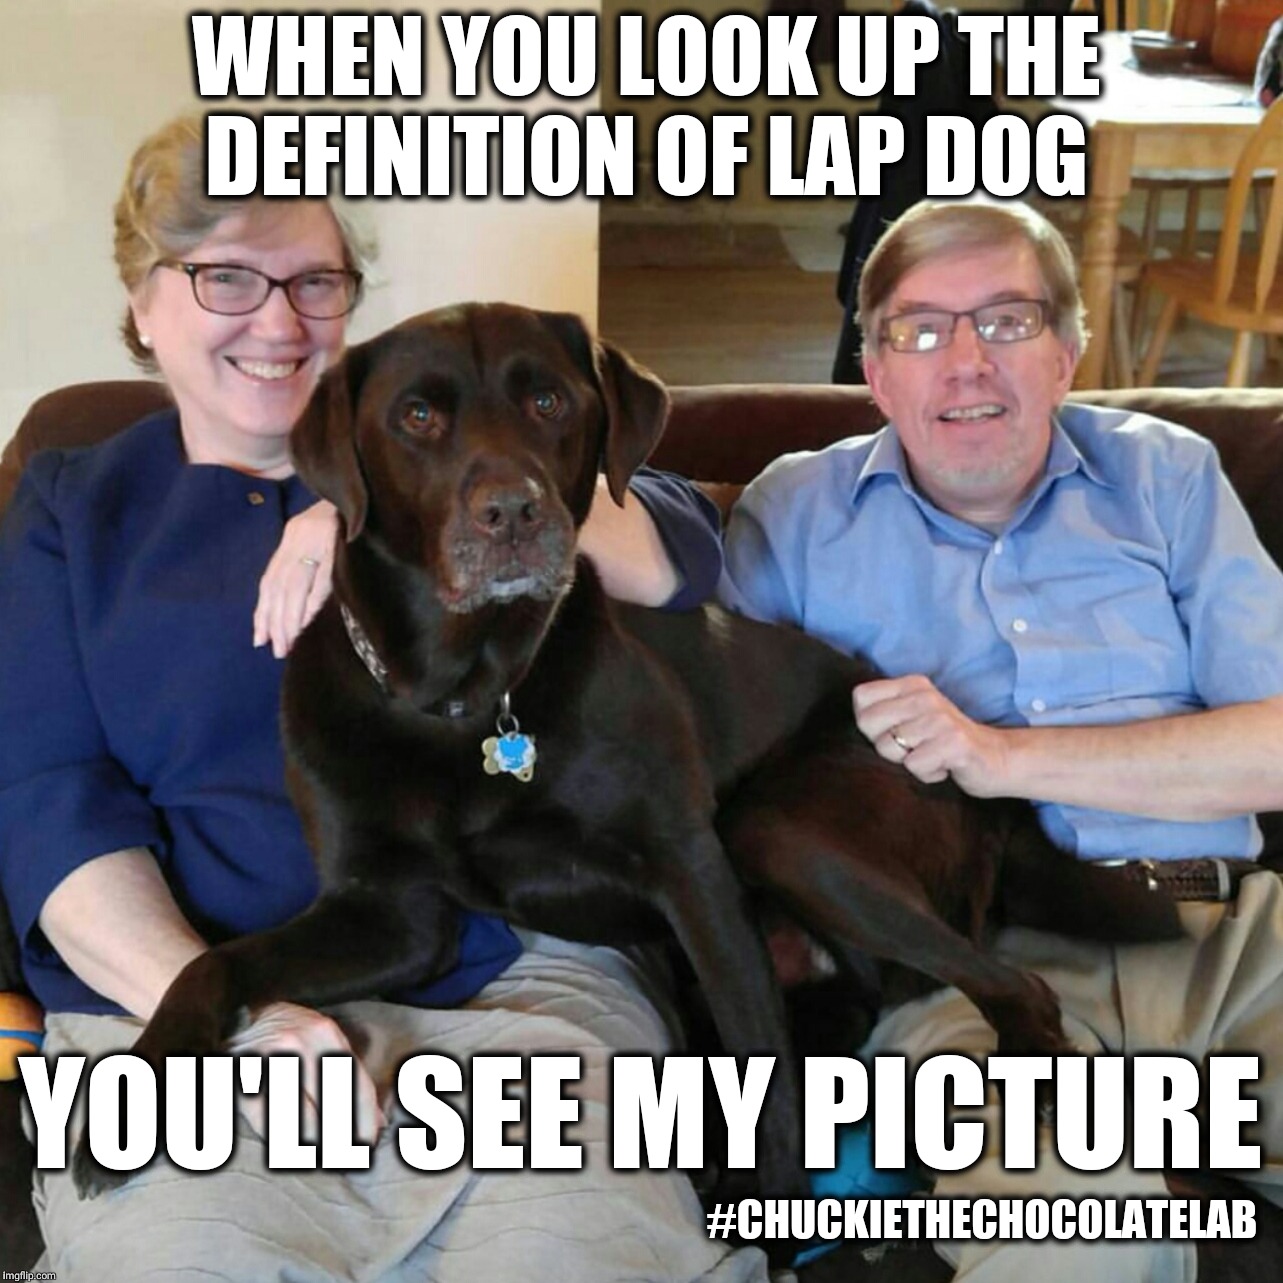 Lap dog | WHEN YOU LOOK UP THE DEFINITION OF LAP DOG; #CHUCKIETHECHOCOLATELAB; YOU'LL SEE MY PICTURE | image tagged in chuckie the chocolate lab,dogs,memes,funny,lap dog,cute animals | made w/ Imgflip meme maker